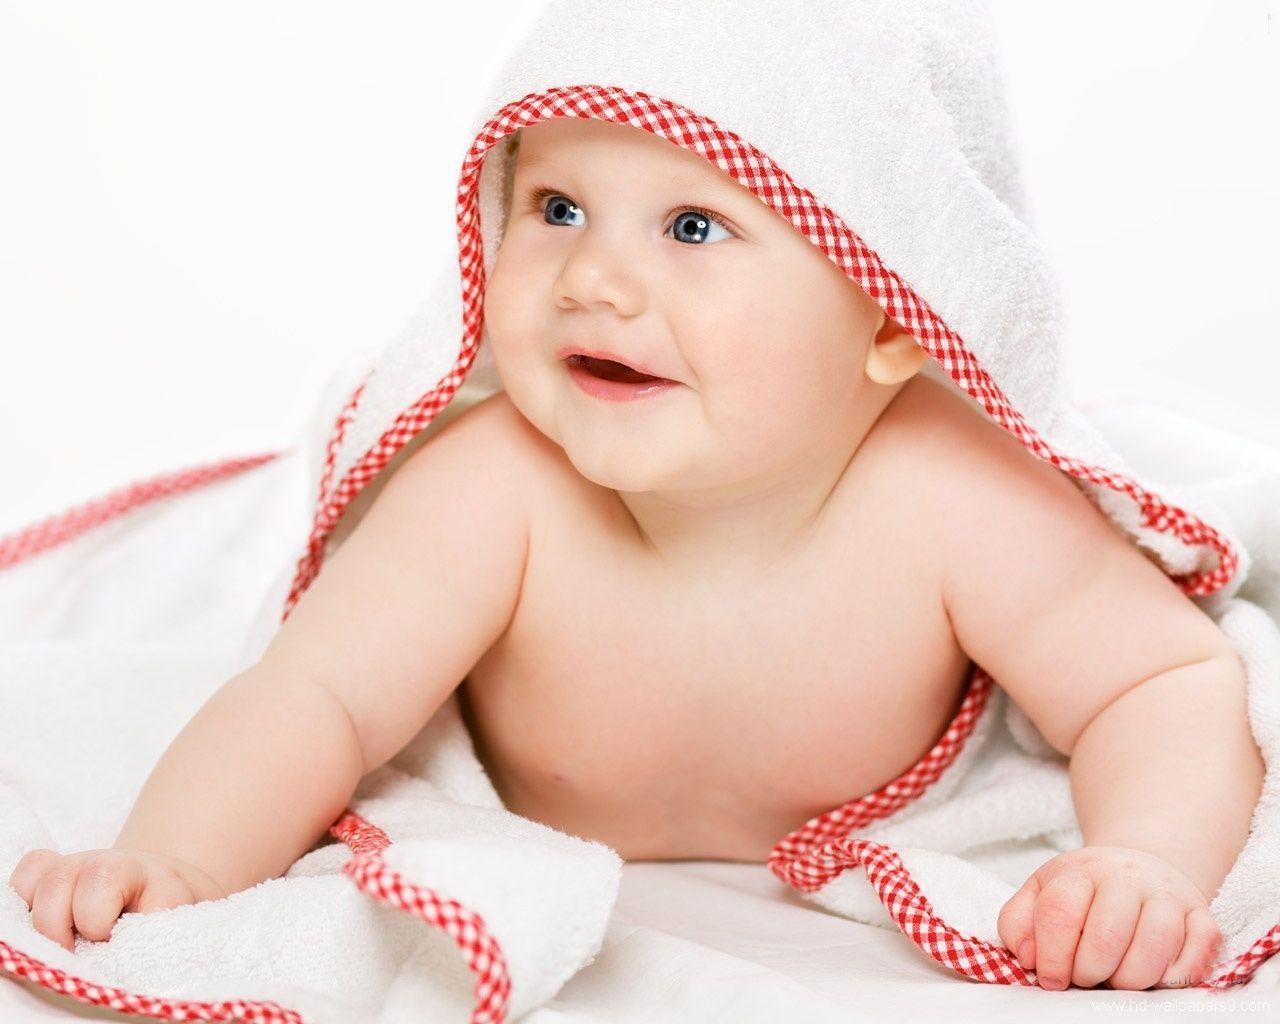 Beautiful Baby Wallpapers For Mobile - Wallpaper Cave